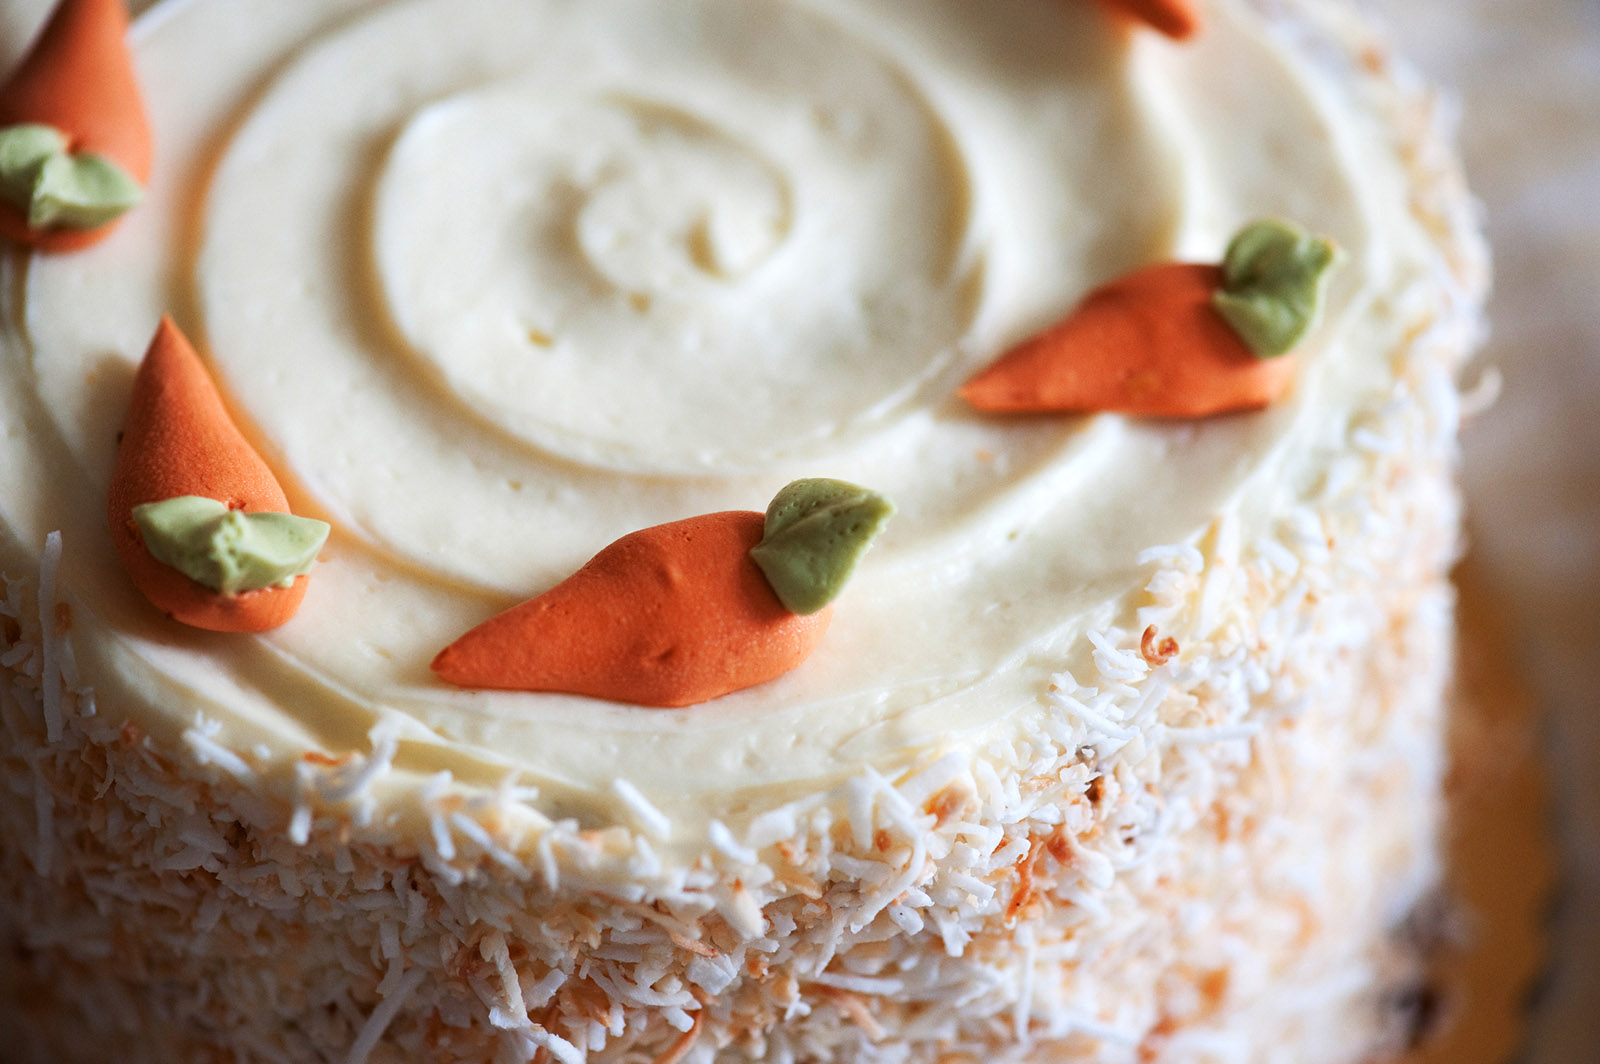 Carrot cake: the 5 most common mistakes